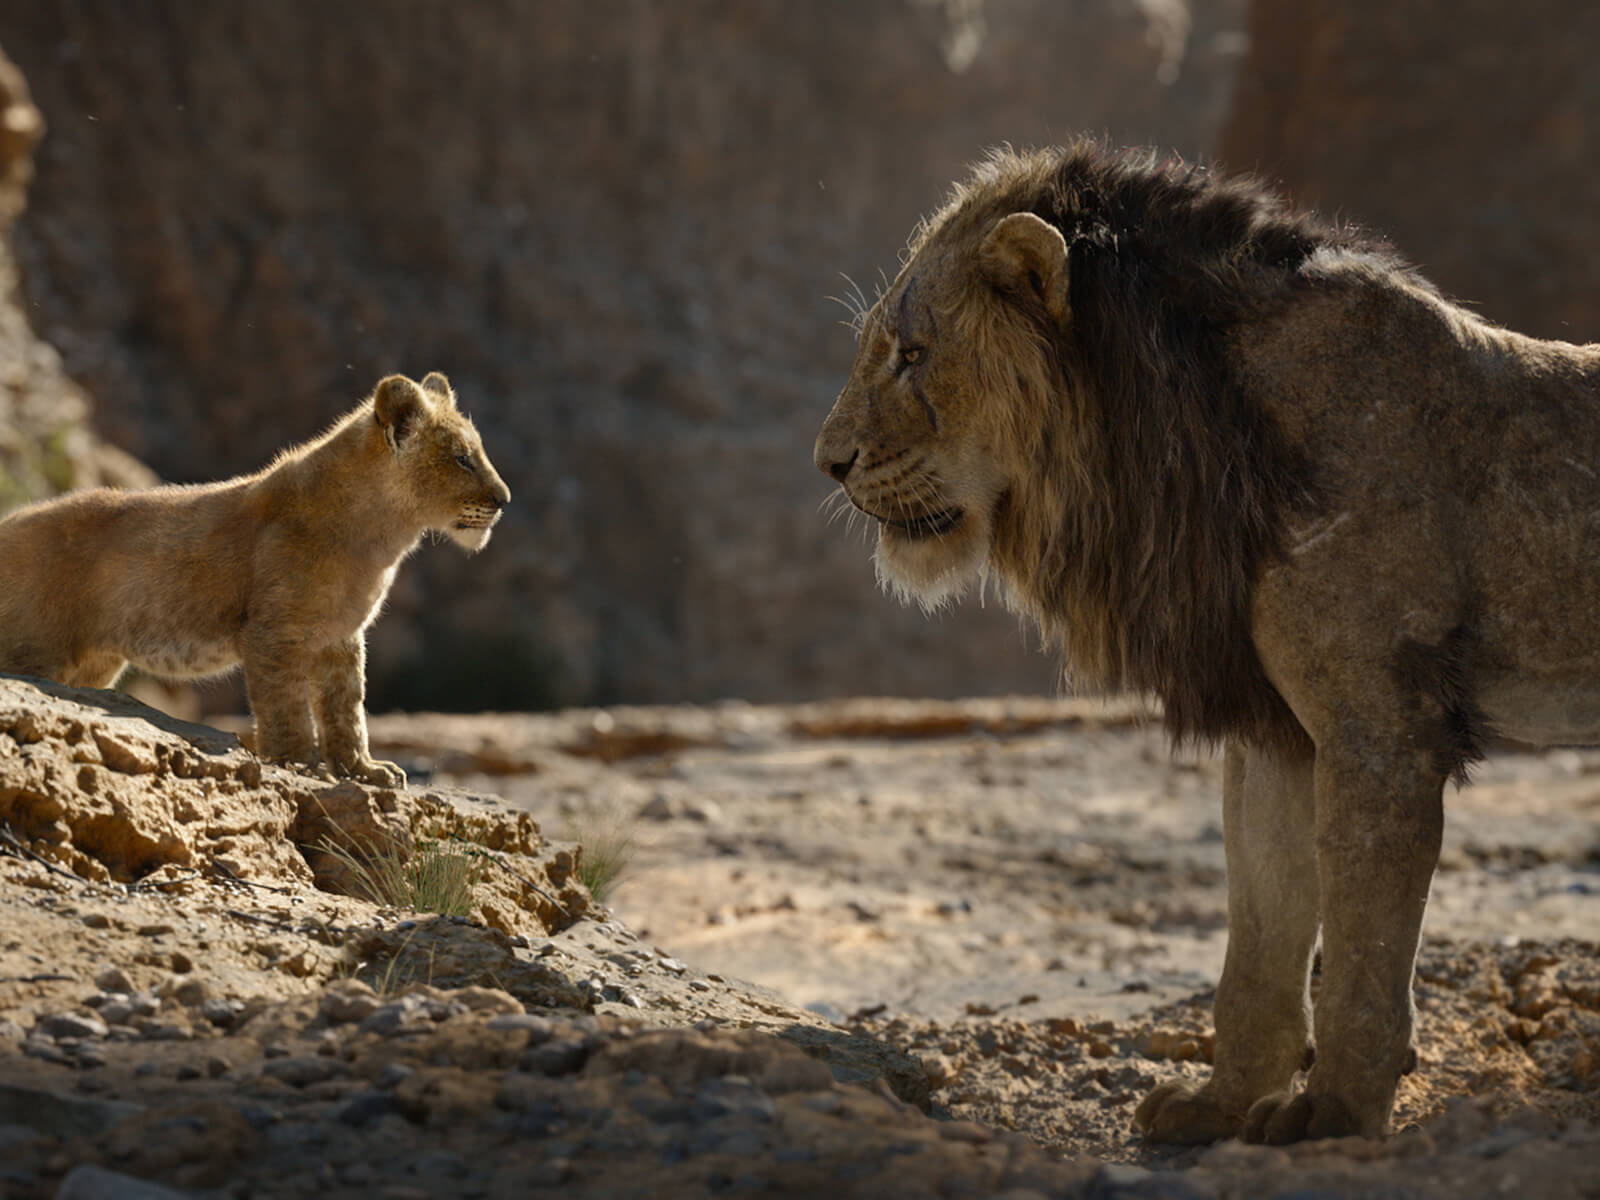 Simba and Mufasa speak to one another in the African savannah in The Lion King.